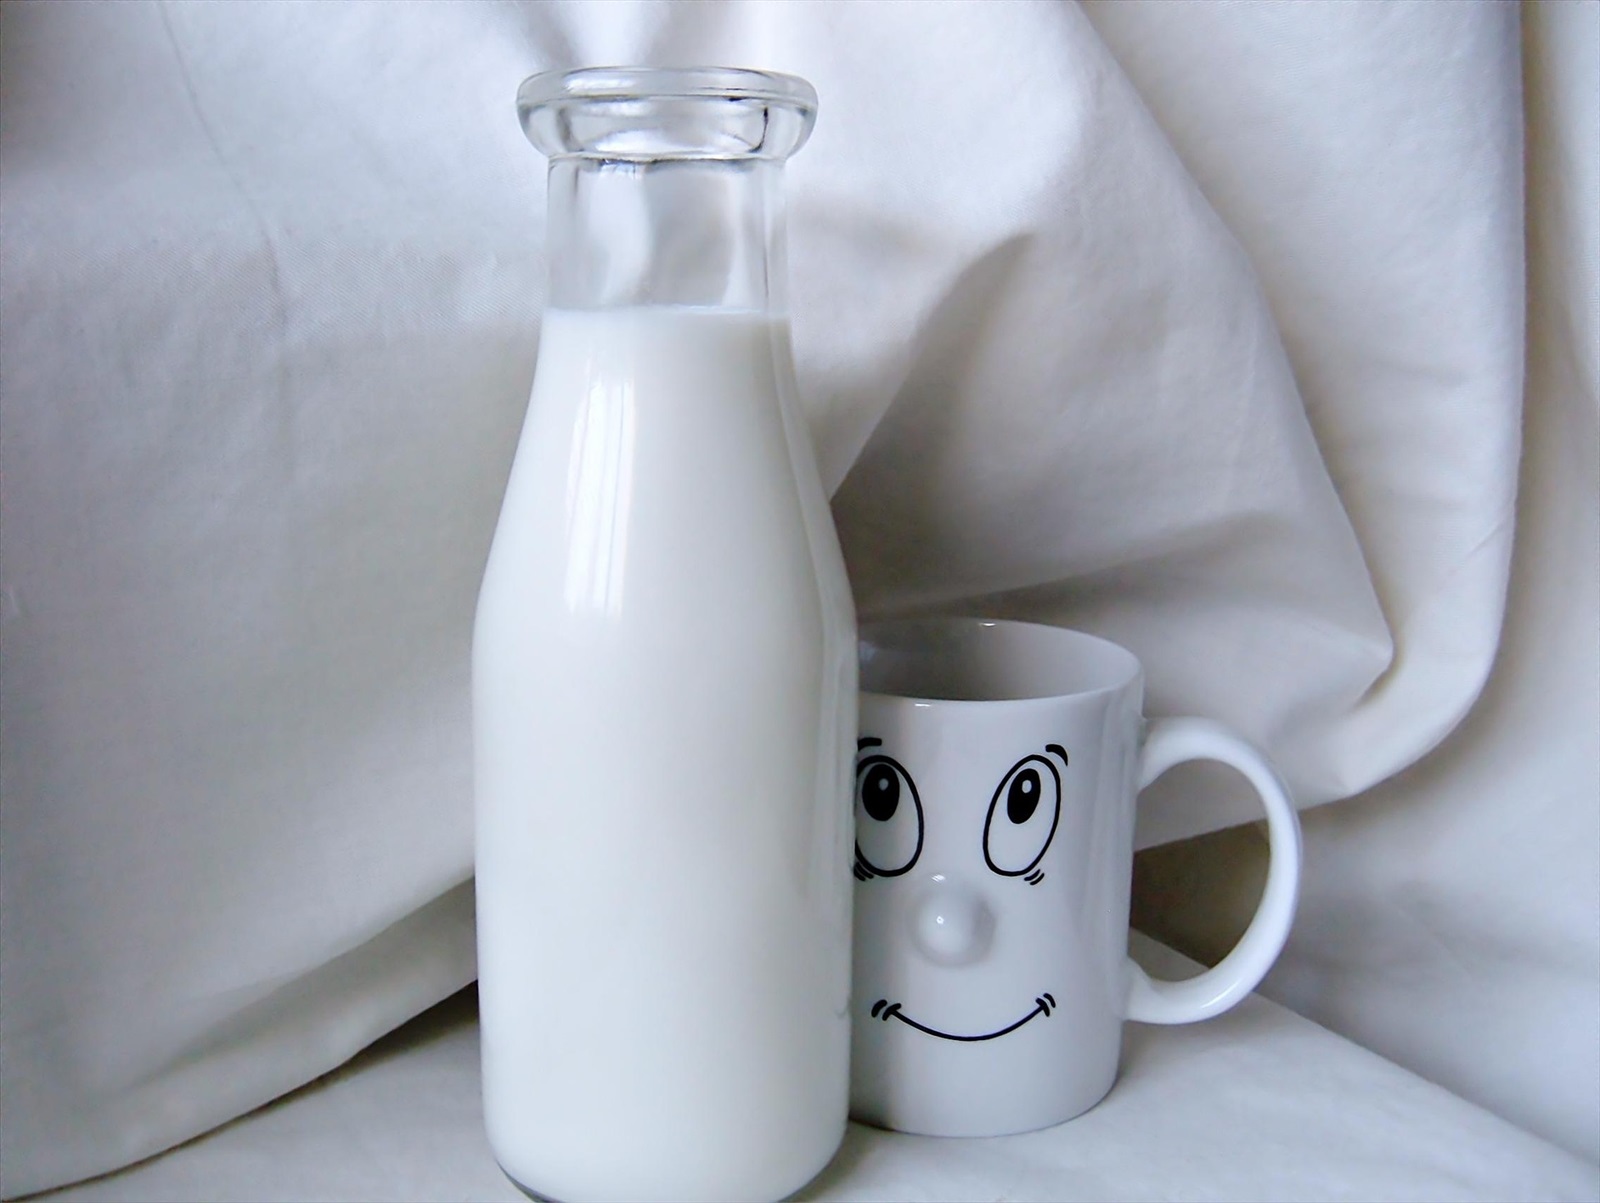 What do you think of the current Milk Scheme for children under five?